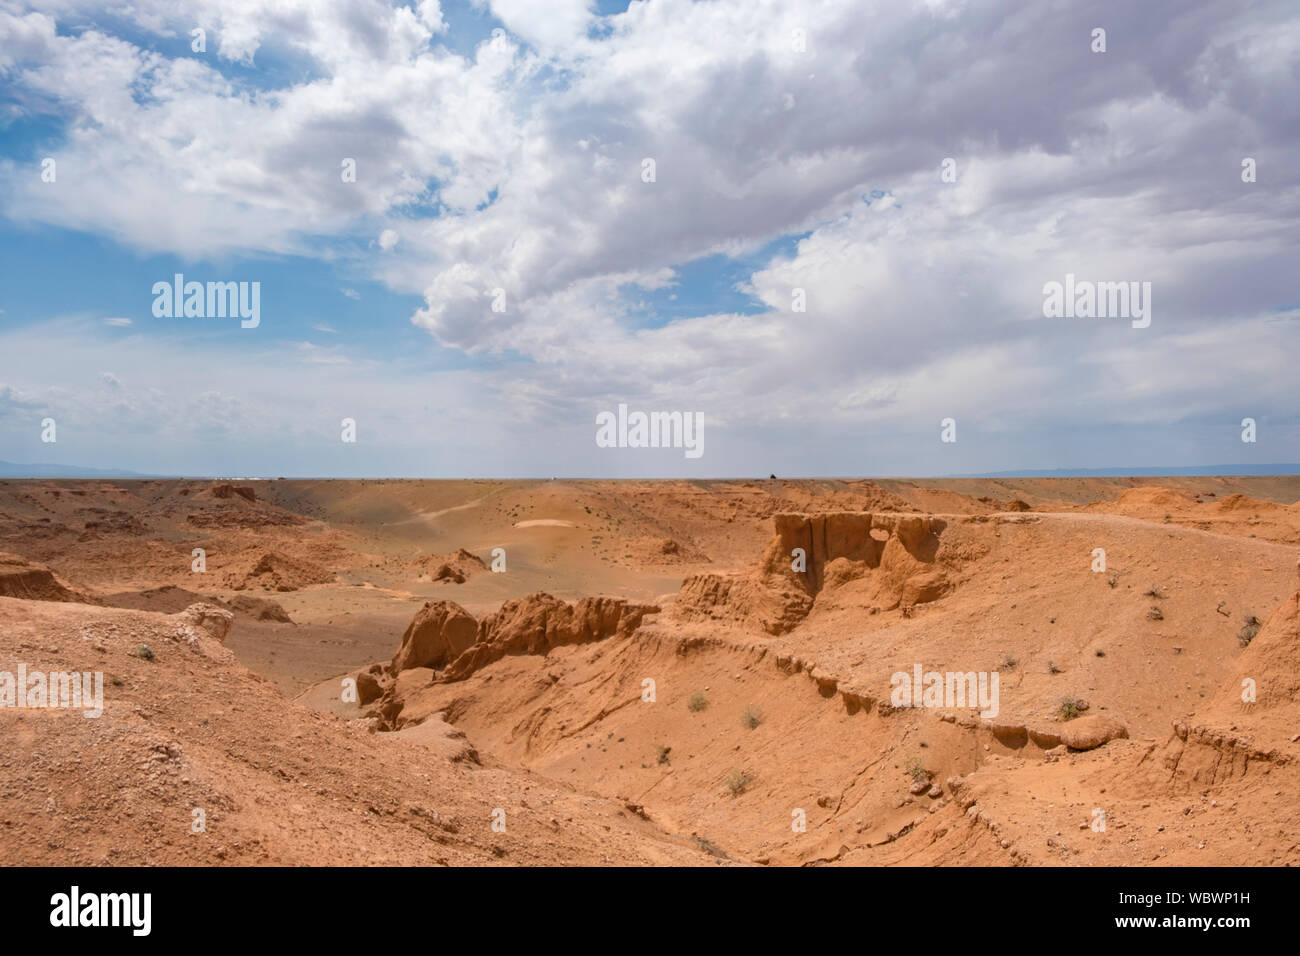 The Flaming Cliffs site is a region of the Gobi Desert in the Ömnögovi Province of Mongolia, in which important fossil finds have been made. The area Stock Photo